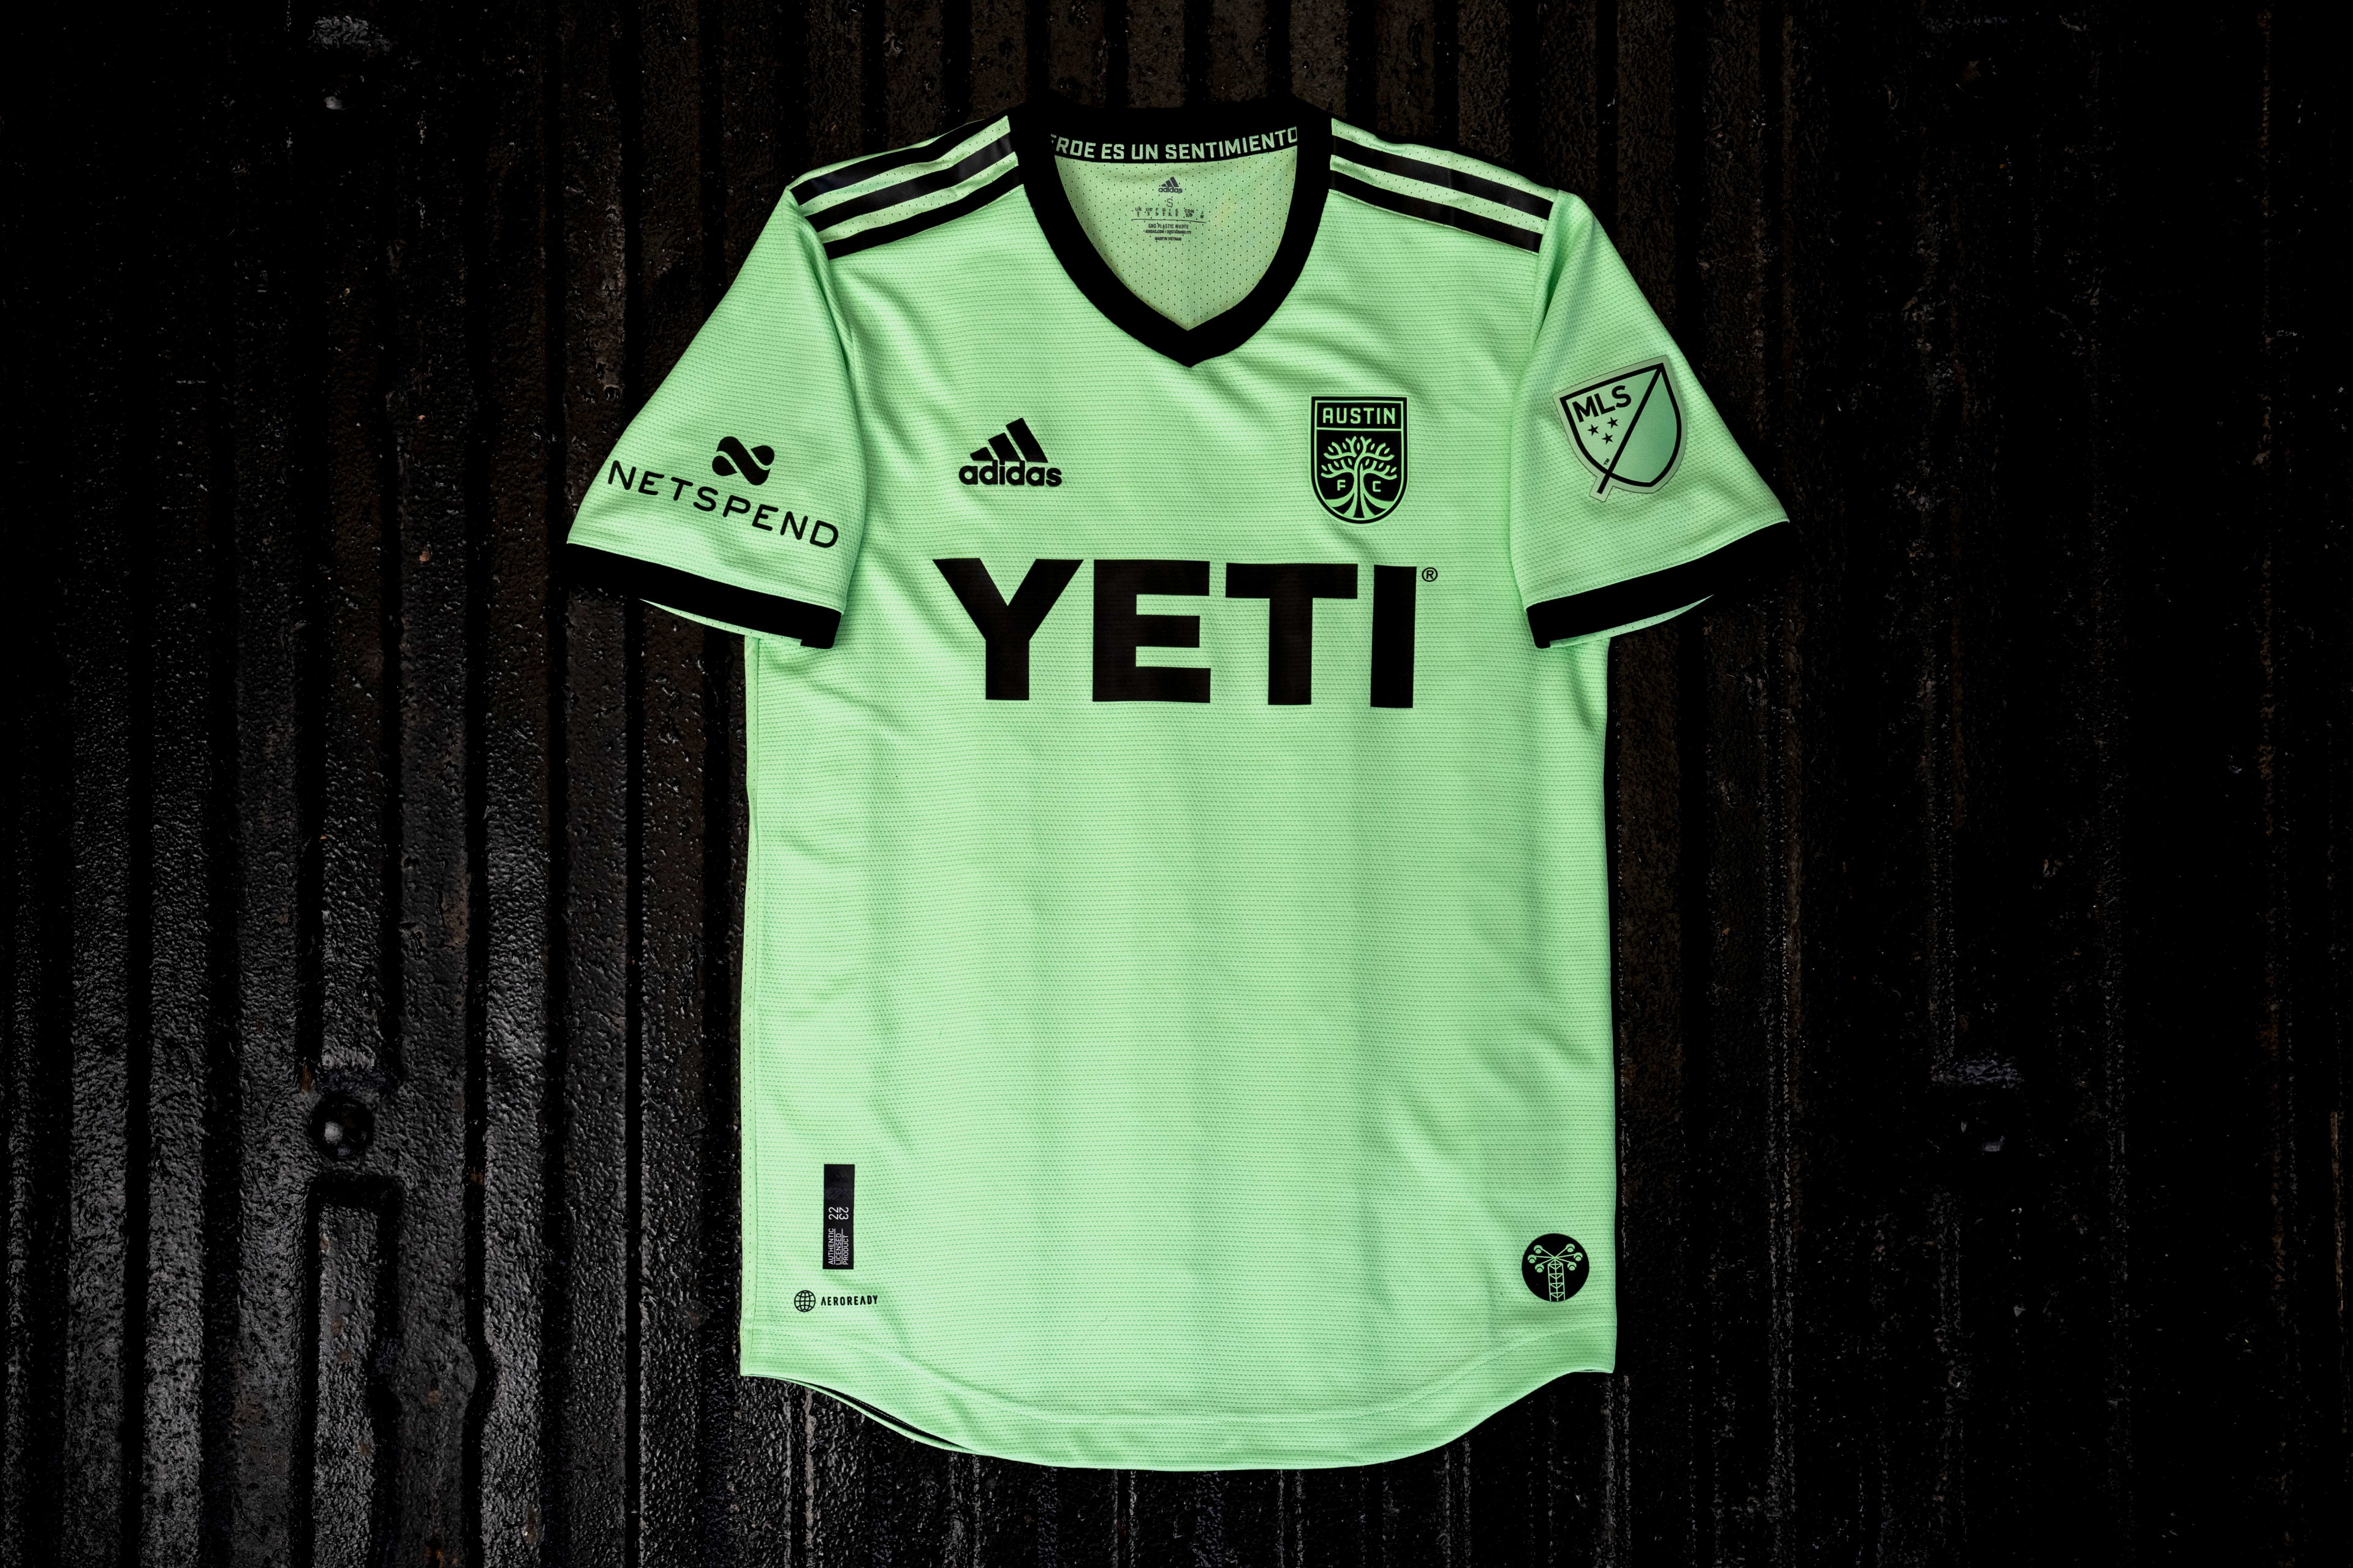 Austin FC Release "The Sentimiento Kit" as the Club's Secondary Jersey